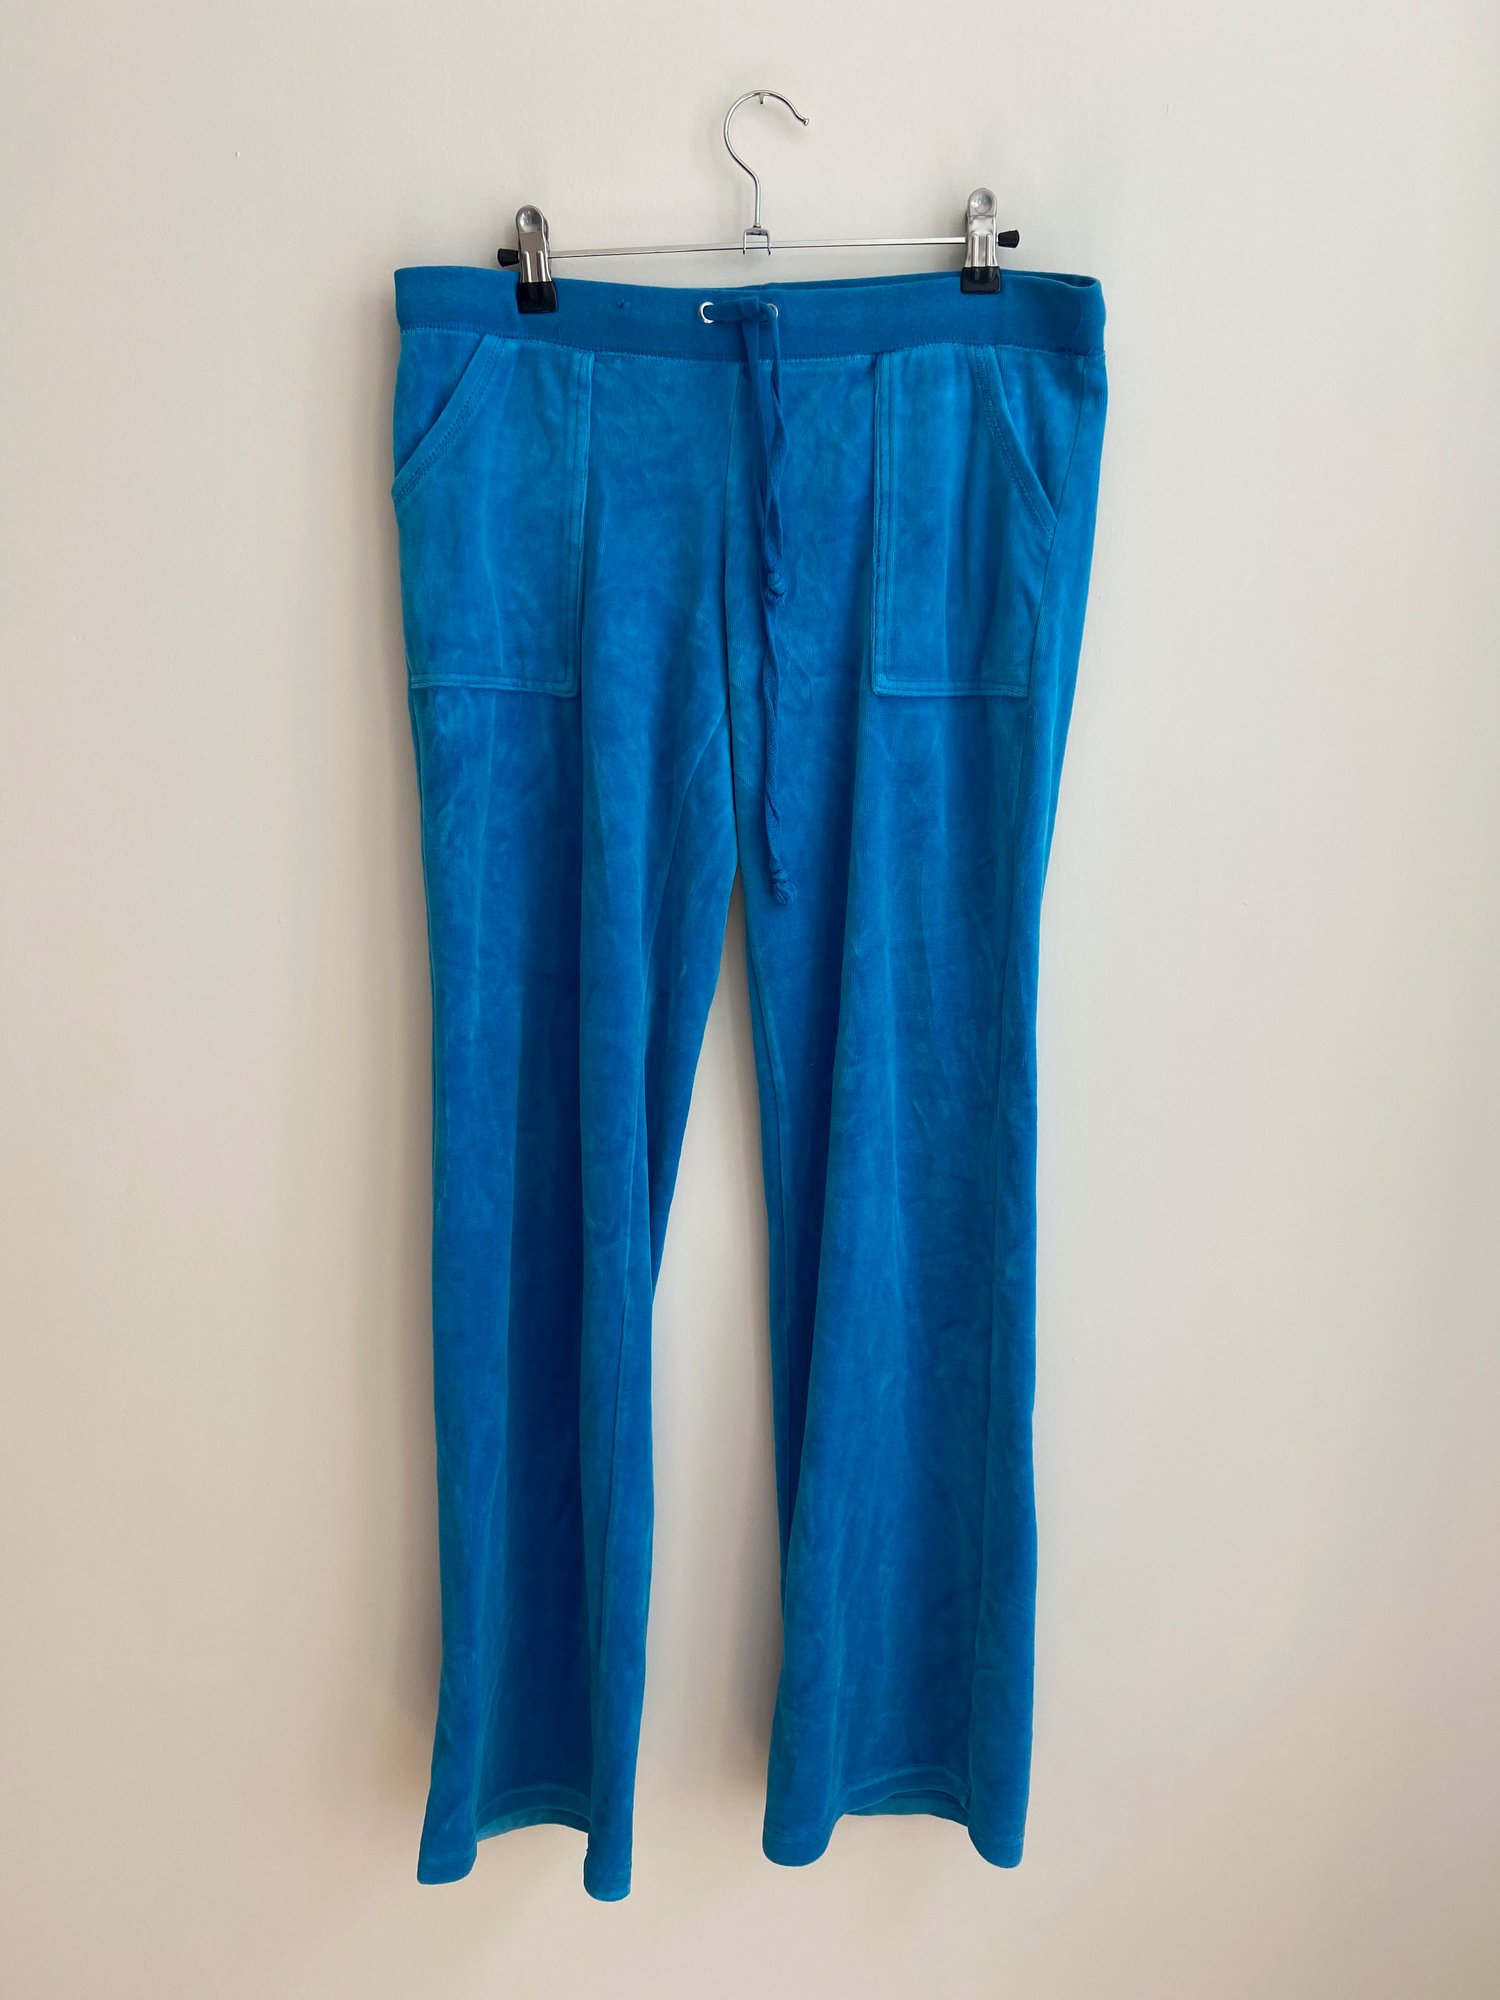 blue velour pants with pockets 